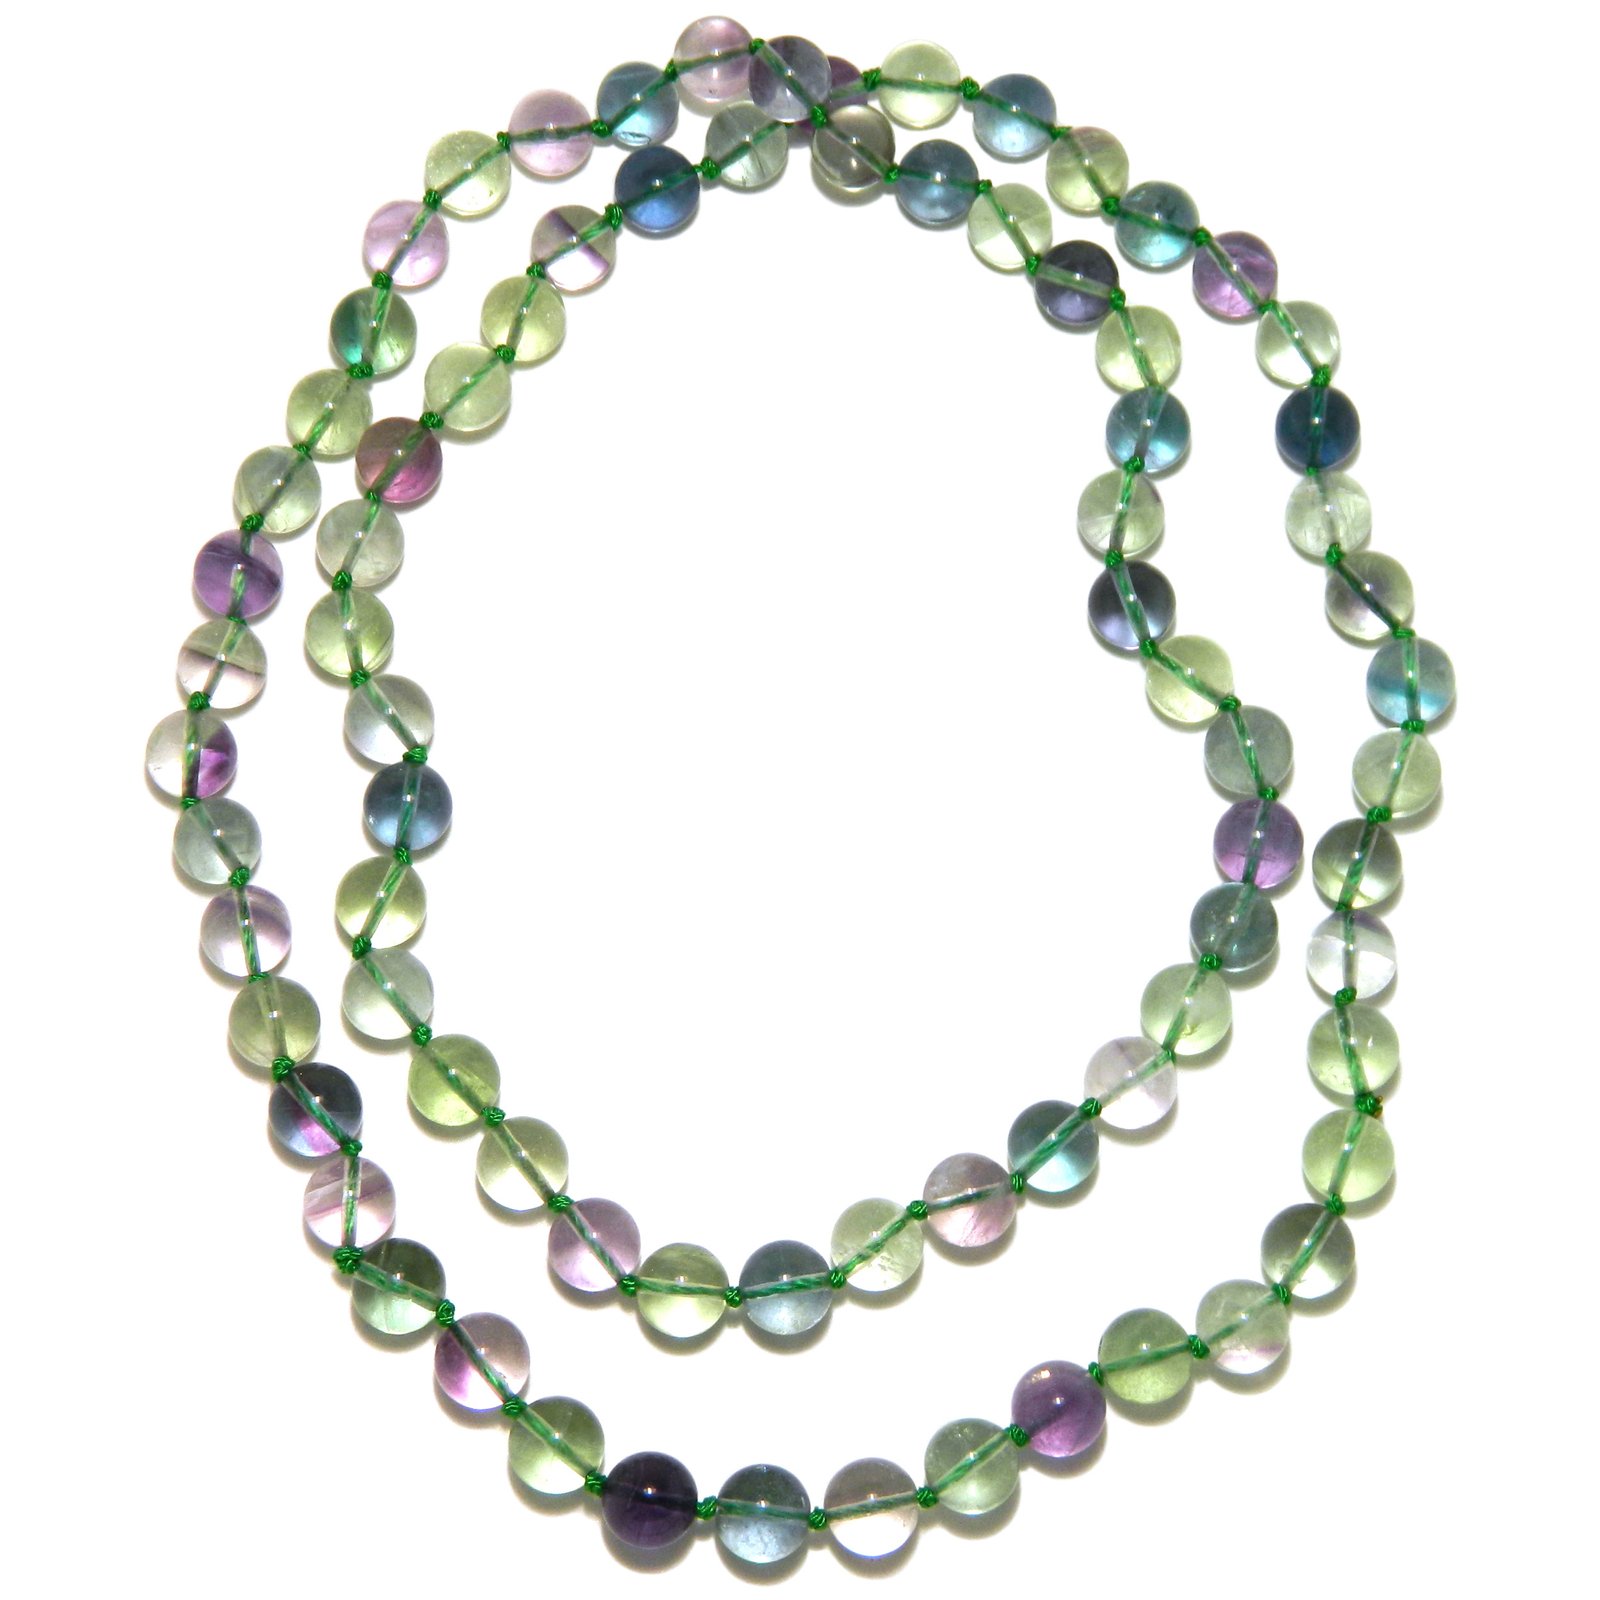 Pearlz Ocean Fluorite Knotted Endless Necklace